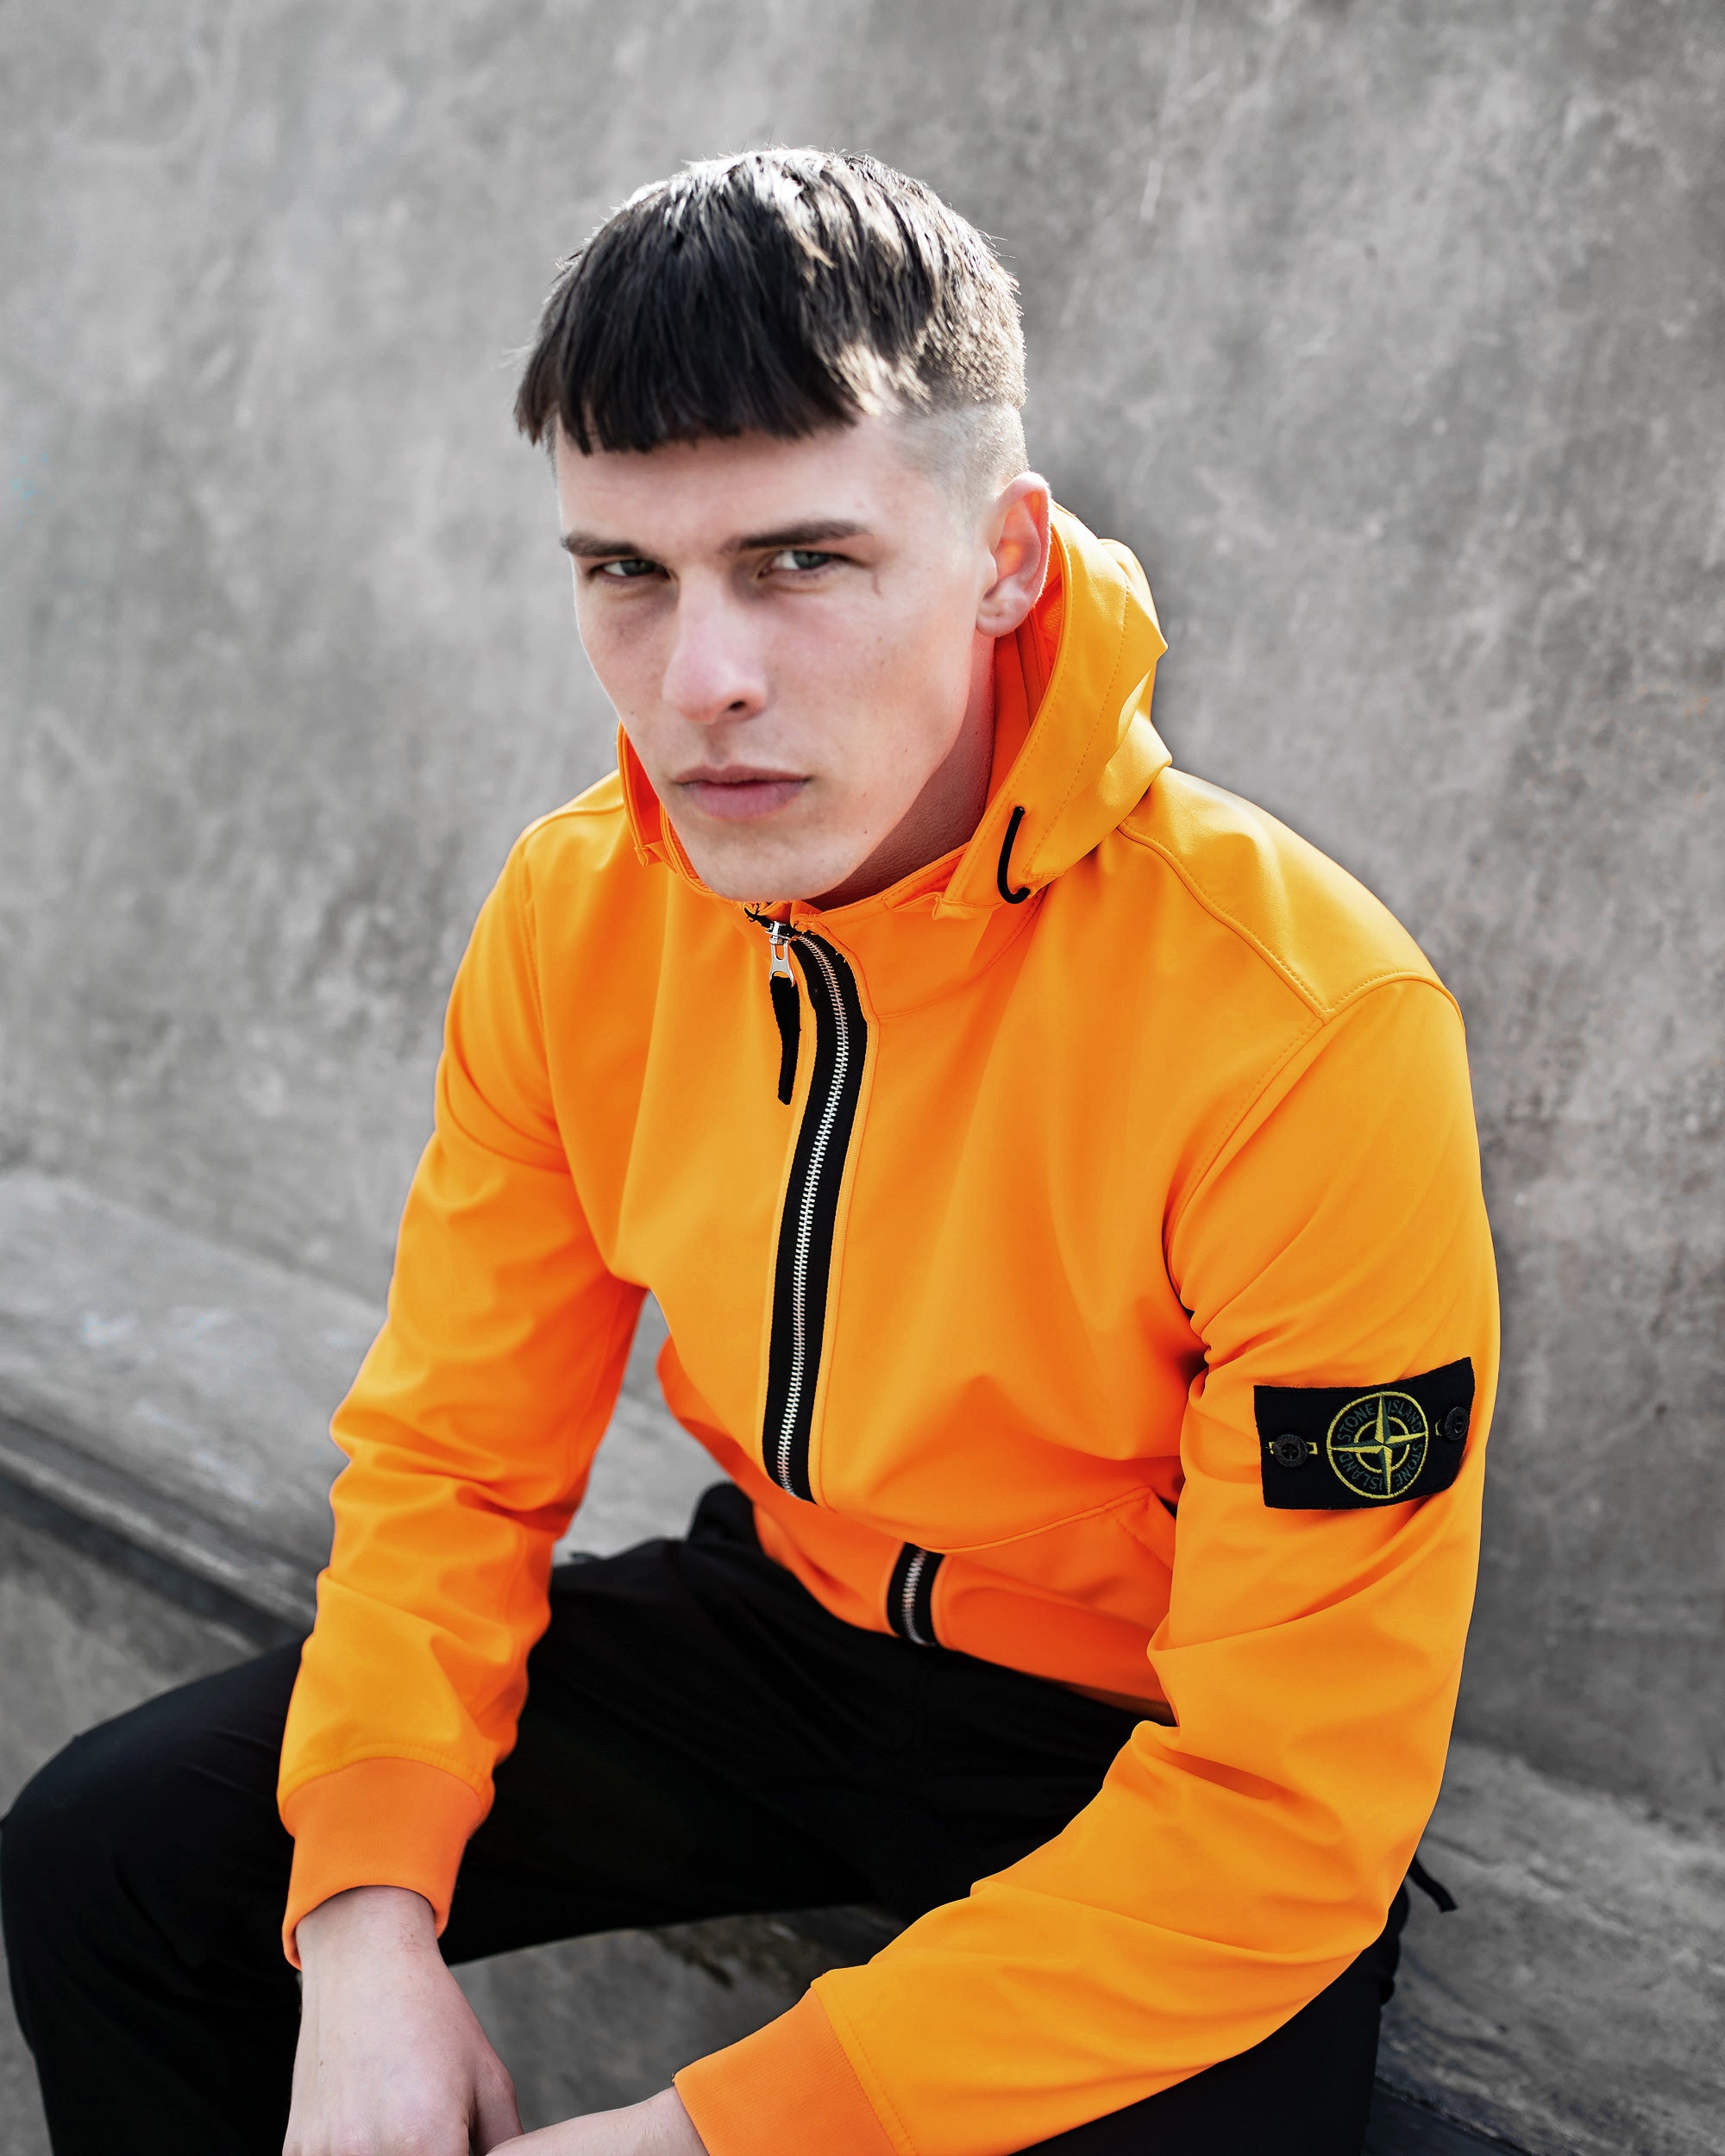 Introducing Stone Island - "Icon Imagery" card image